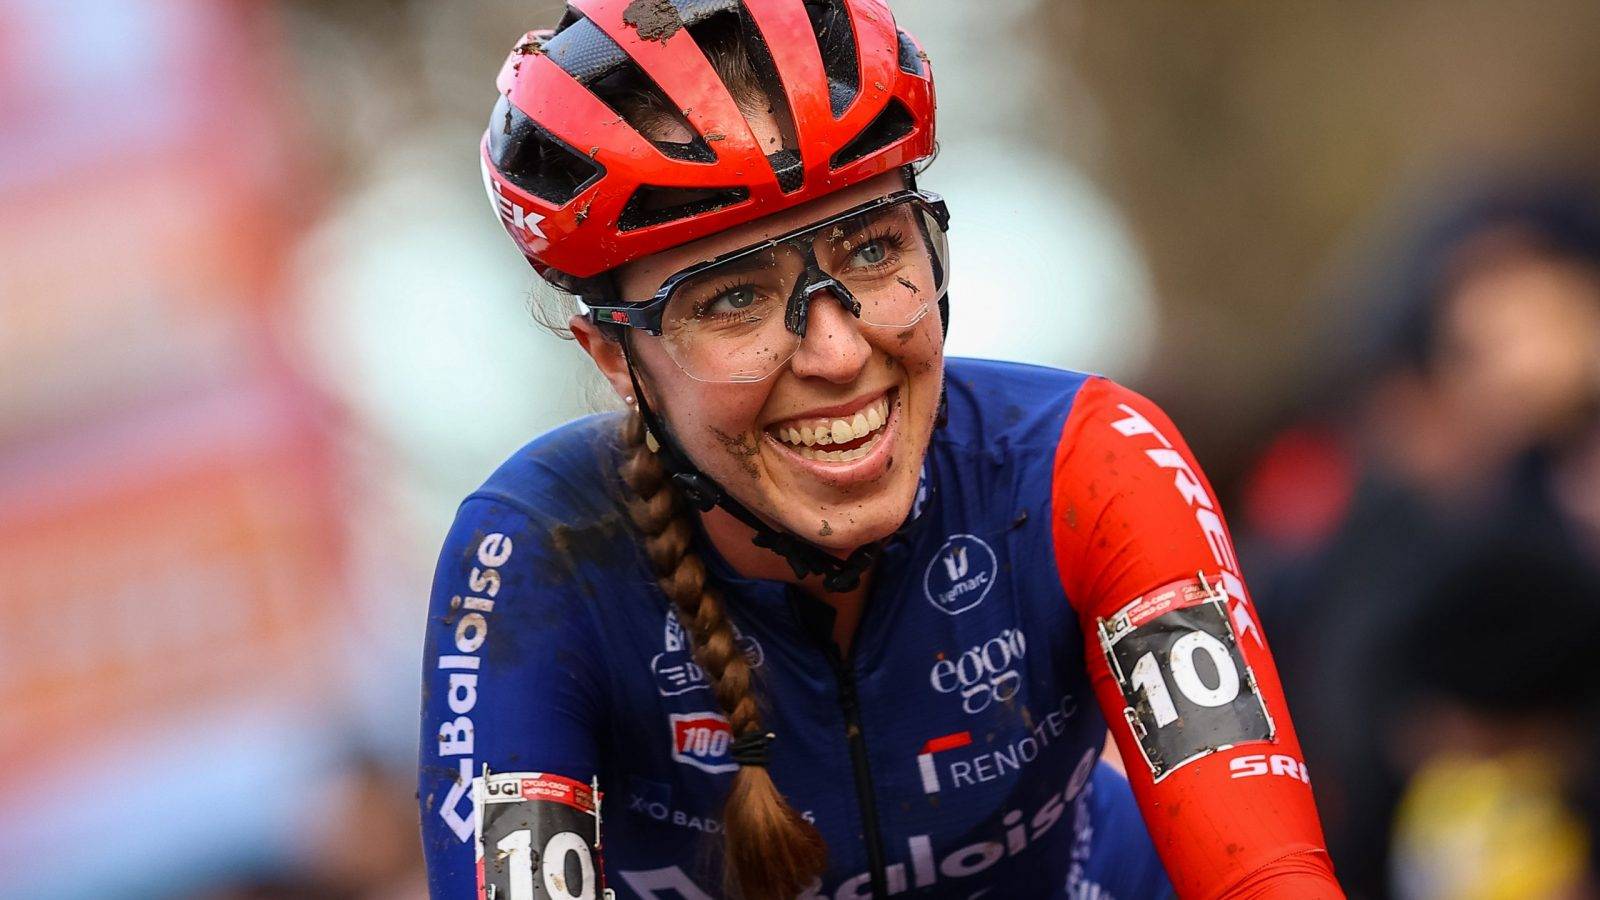 Dutch Shirin van Anrooij celebrates as she crosses the finish line to win the women's elite race of the World Cup cyclocross cycling event in Gavere on Monday 26 December 2022, stage 11 (out of 14) of the UCI World Cup competition. BELGA PHOTO DAVID PINTENS